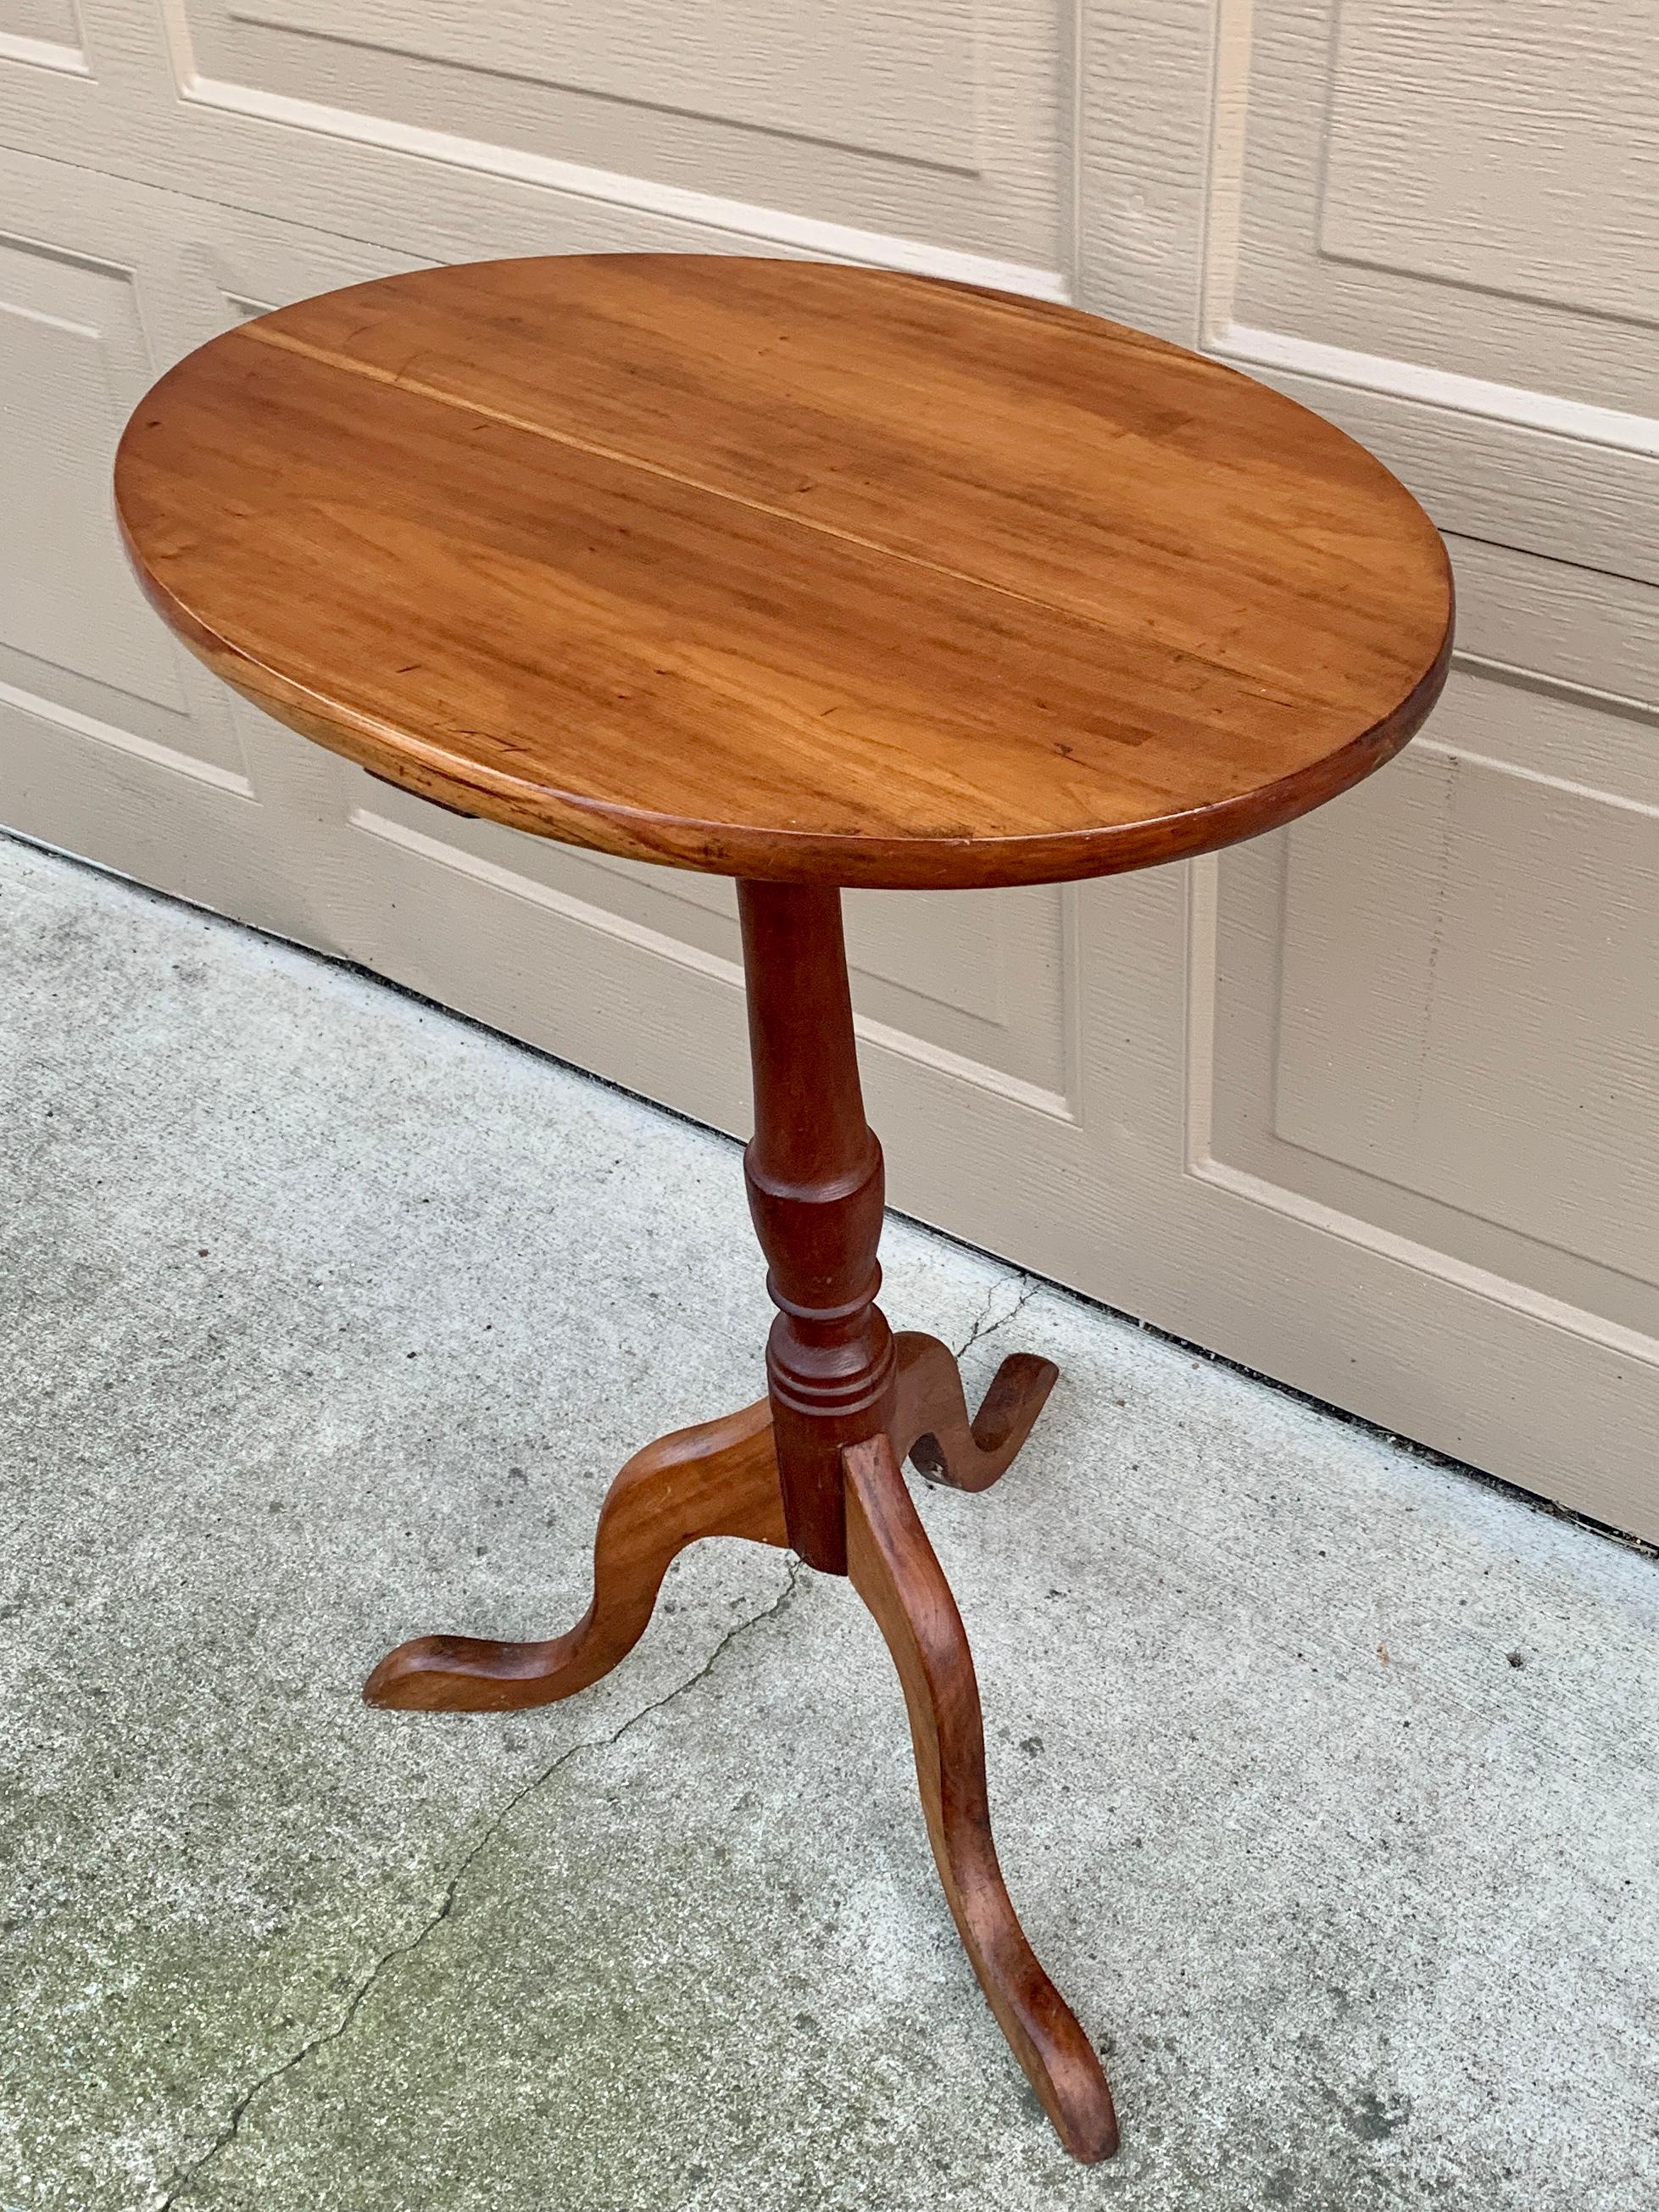 Queen Anne Antique American Colonial Cherry Candle Stand or Side Table, Mid 19th Century For Sale